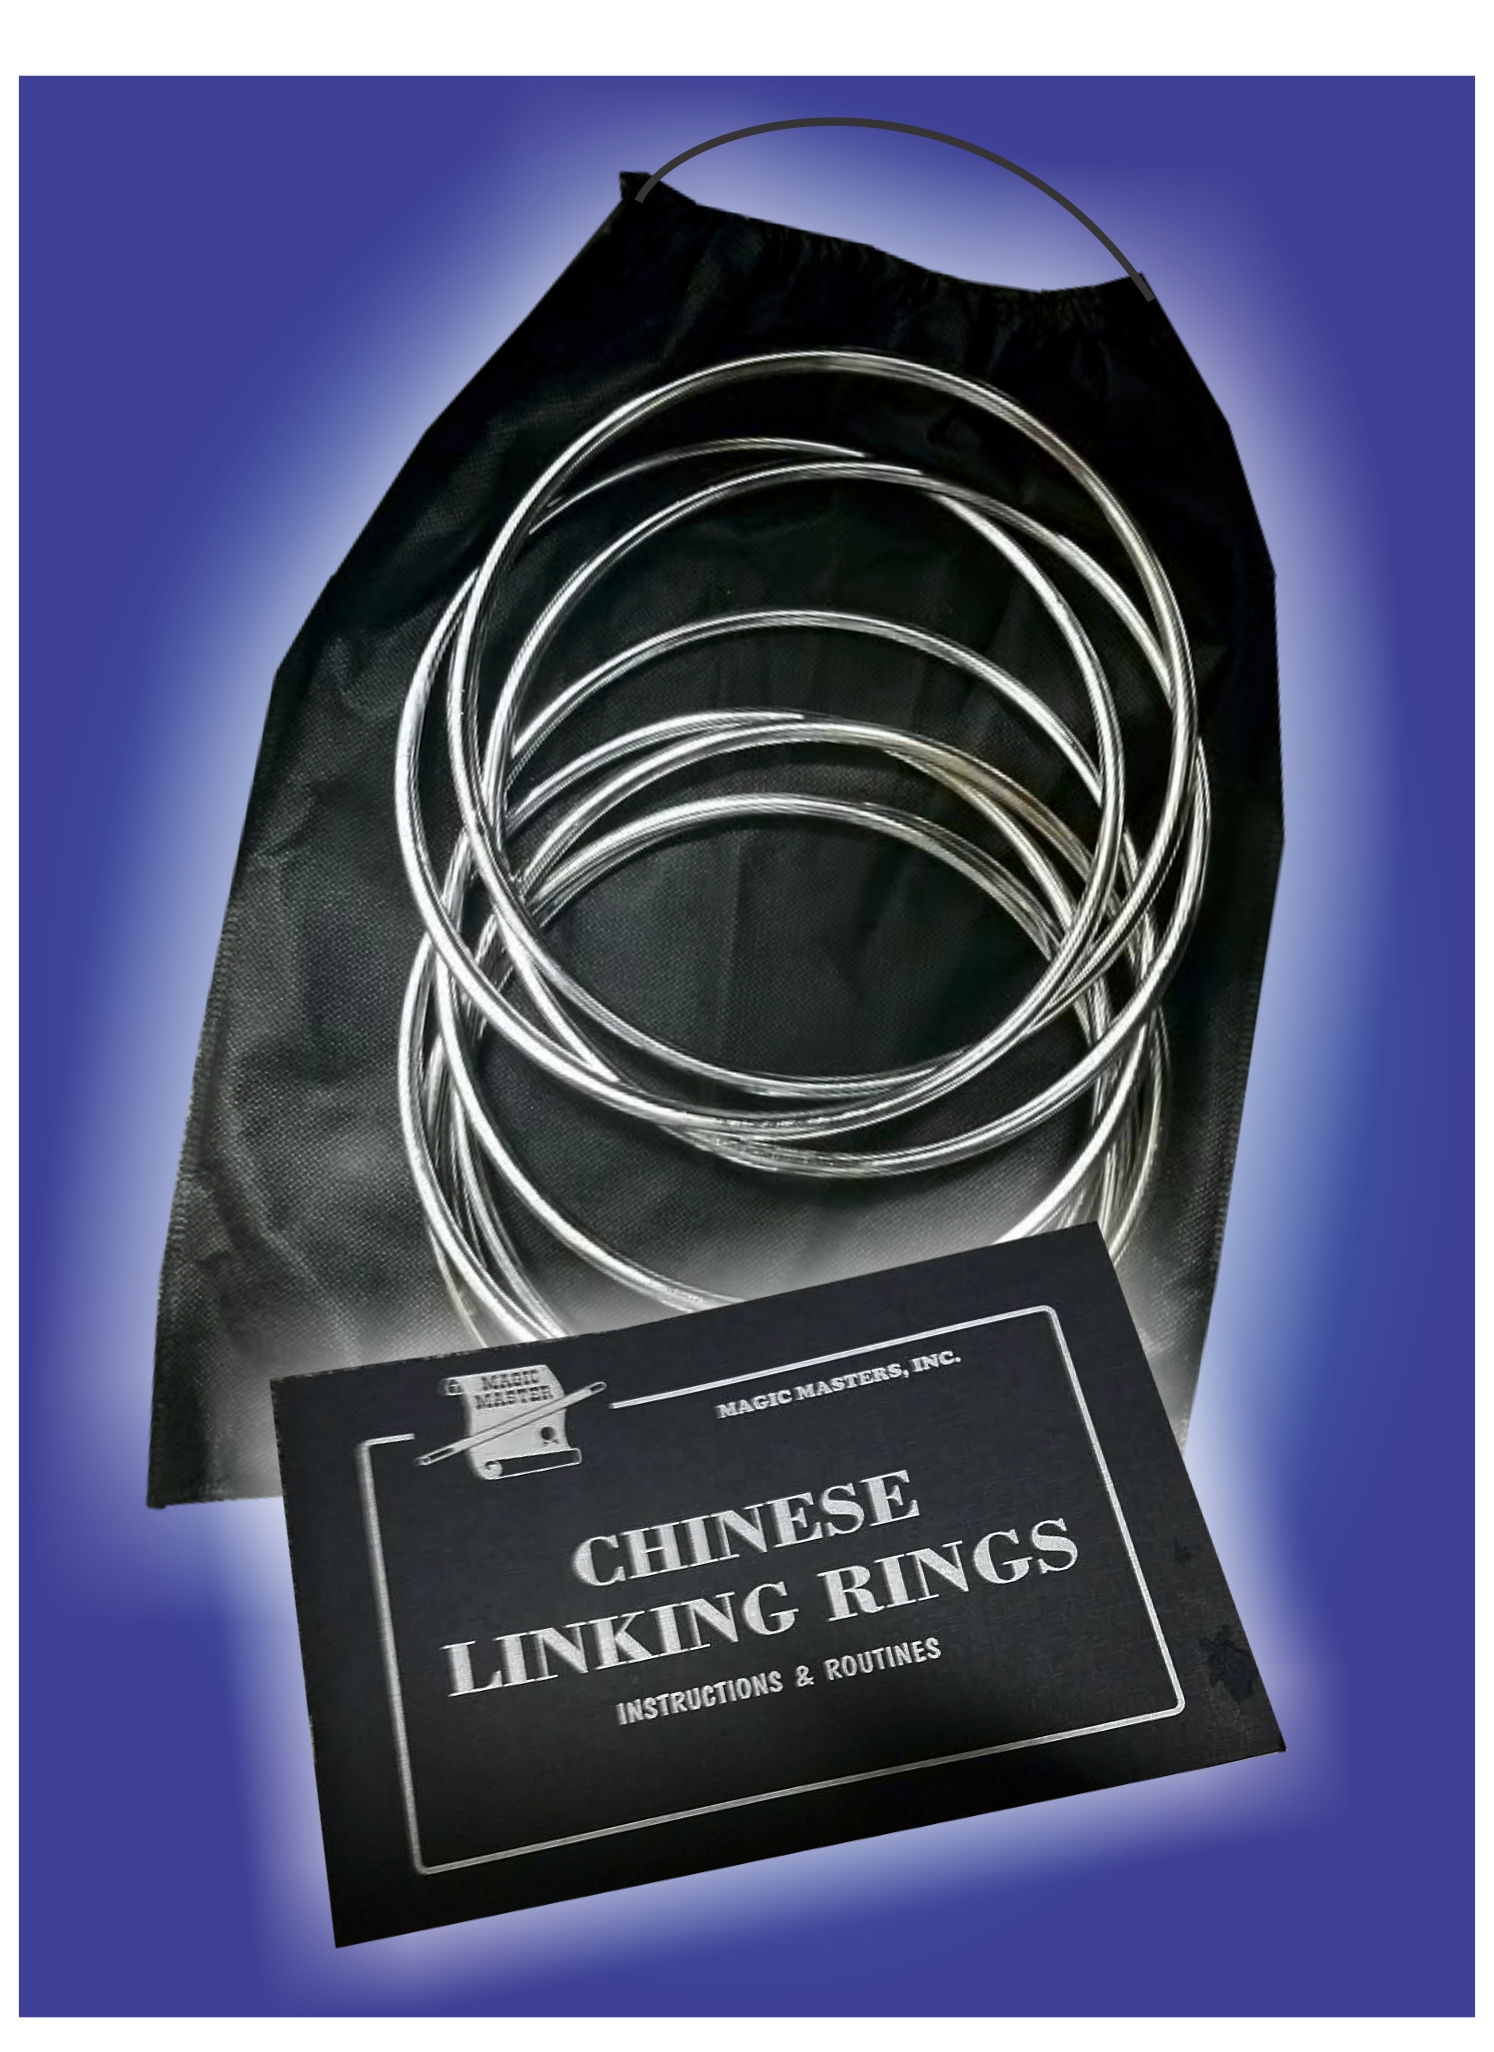 PROFESSIONAL LINKING RING SET by MAGIC MASTERS